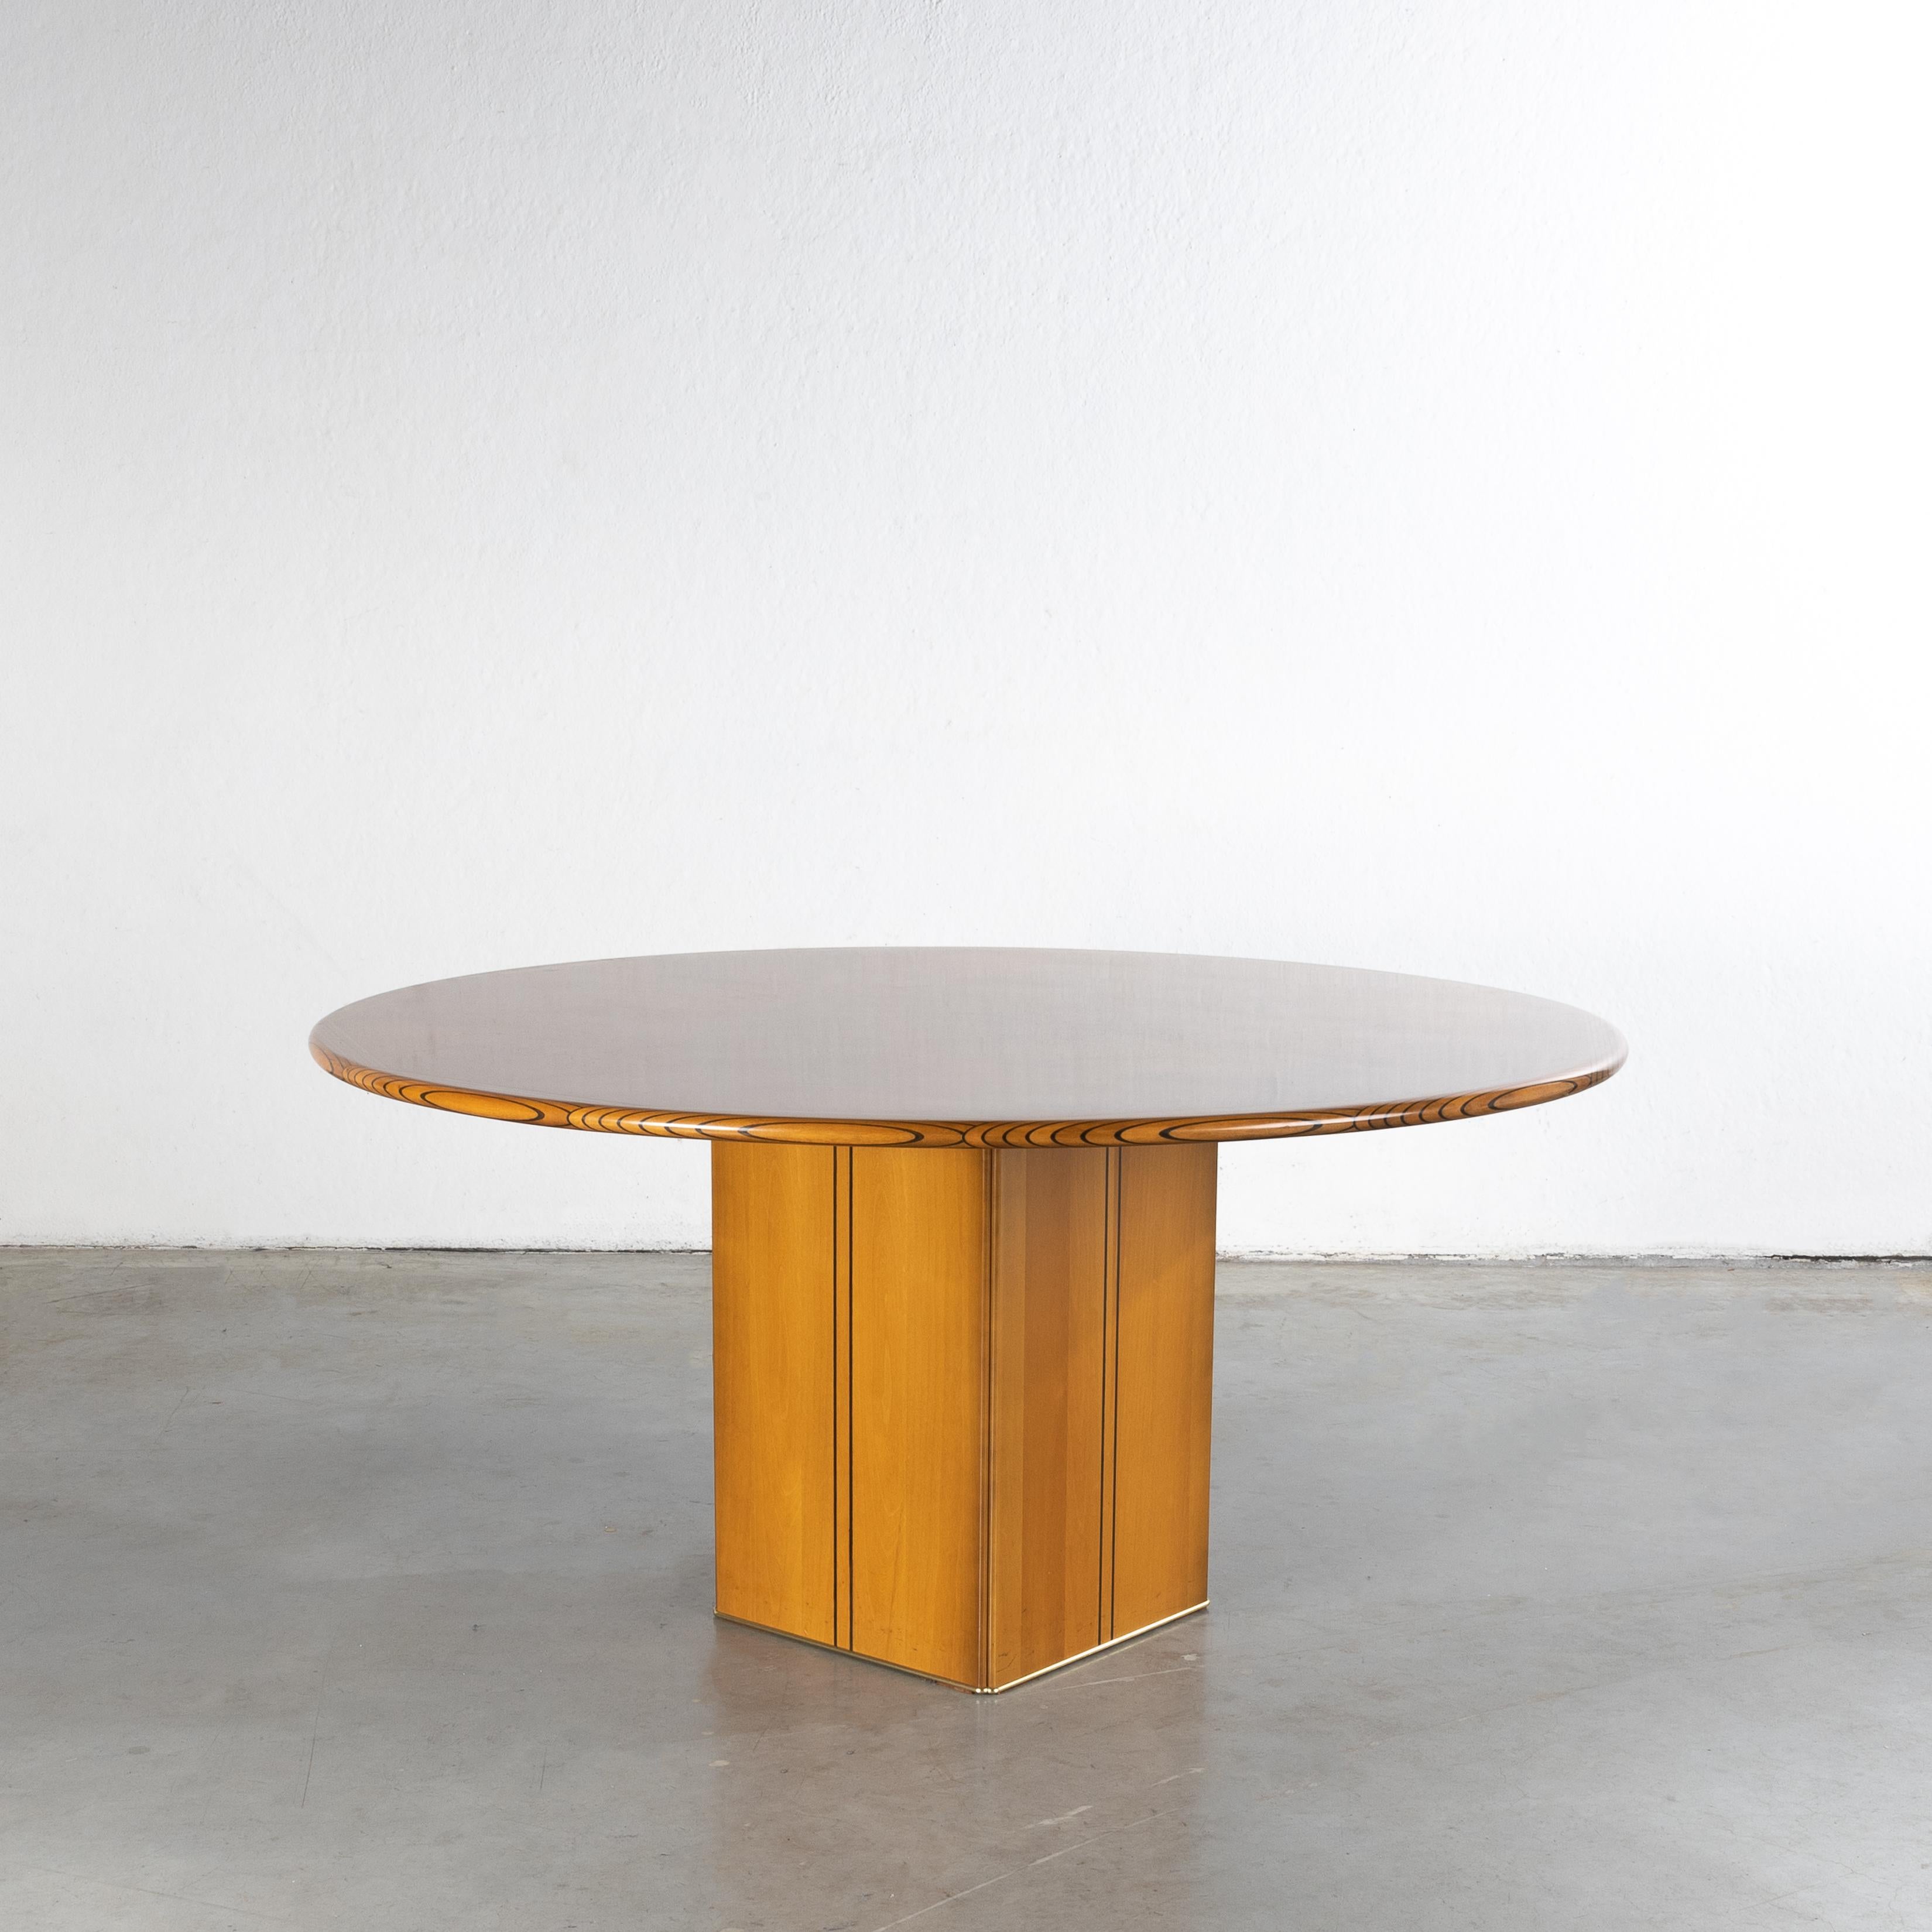 Set consisting of a table and 6 chairs.
The chairs in solid walnut laminated with contrasting hardwood to form the backrest.
The seat of the chairs in curved plywood covered with cognac-coloured leather.
The base of the table is a walnut